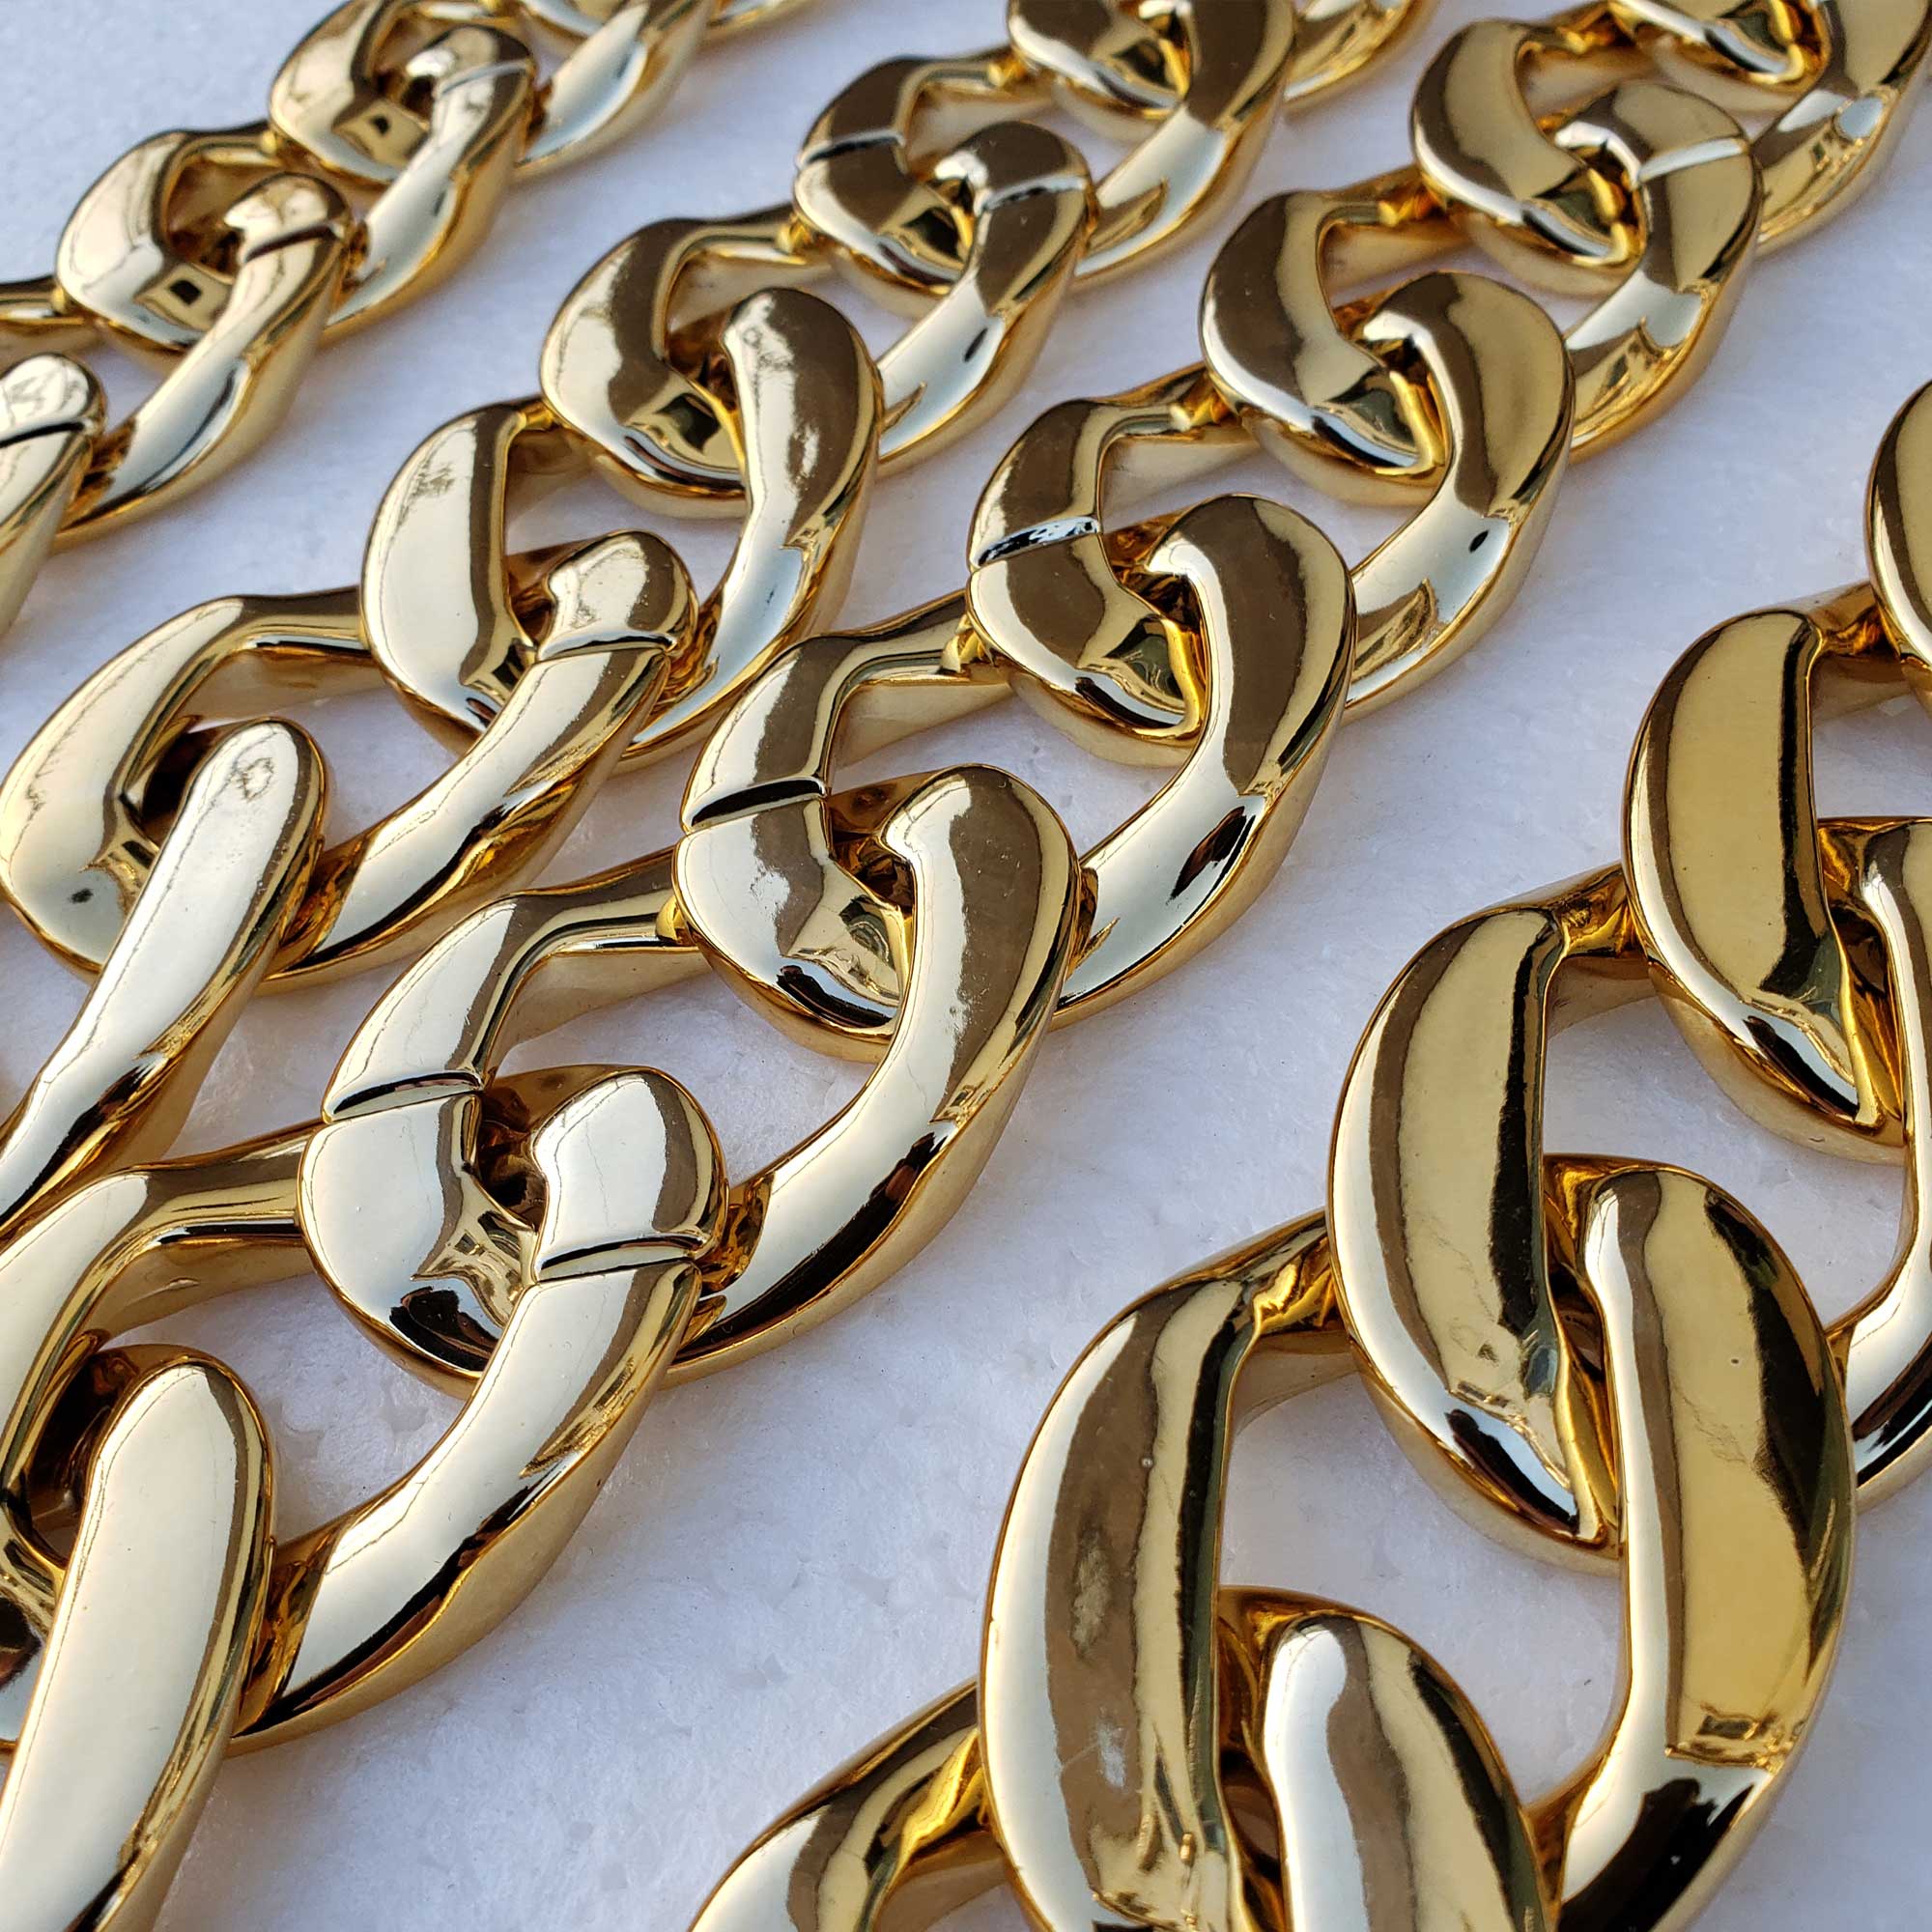 Gold Chunky Chain Necklace，Faux Acrylic Plastic Hip Hop Necklace for Men  Women，90s Punk Style Necklace Costume Jewelry (50) | Amazon.com